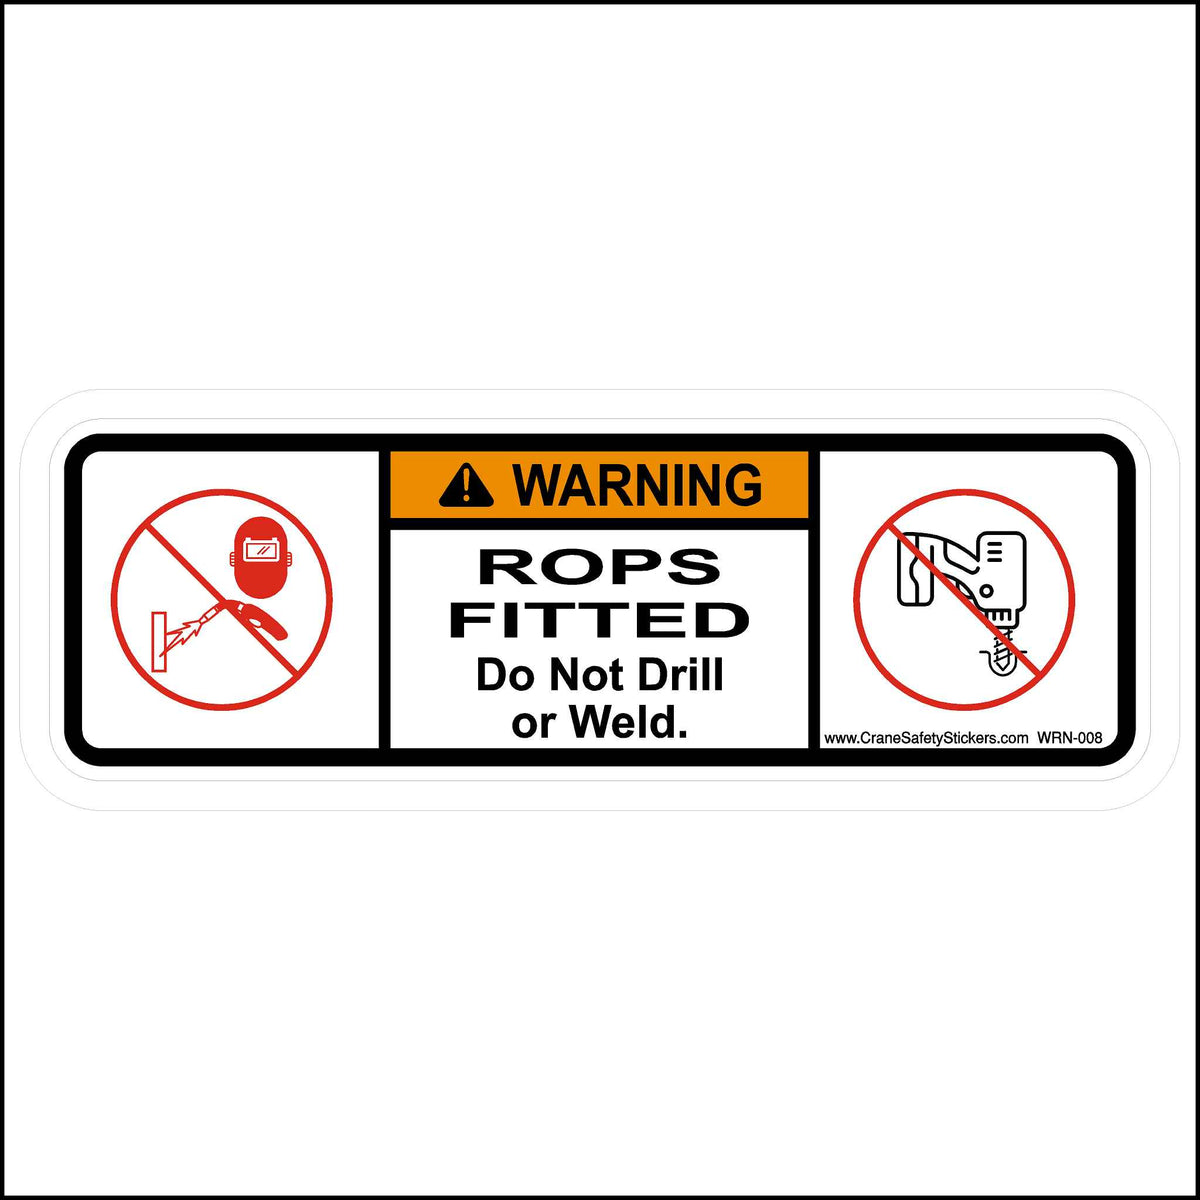 This Warning Rops Fitted Sticker is Printed With. WARNING, ROPS Fitted Do Not Drill Or Weld.